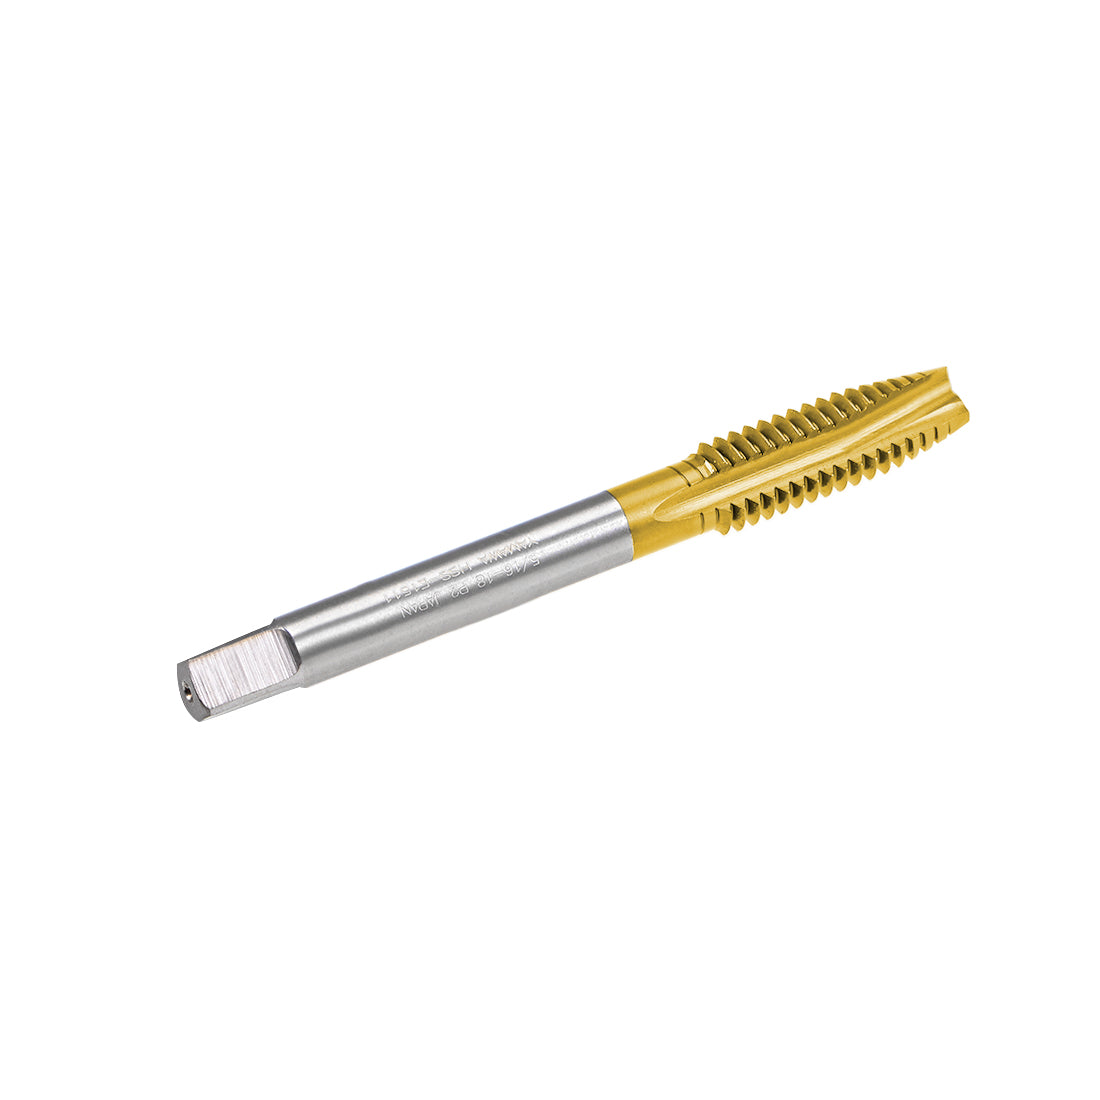 uxcell Uxcell Spiral Point Threading Tap 5/16-18 UNC Thread Pitch High Speed Steel